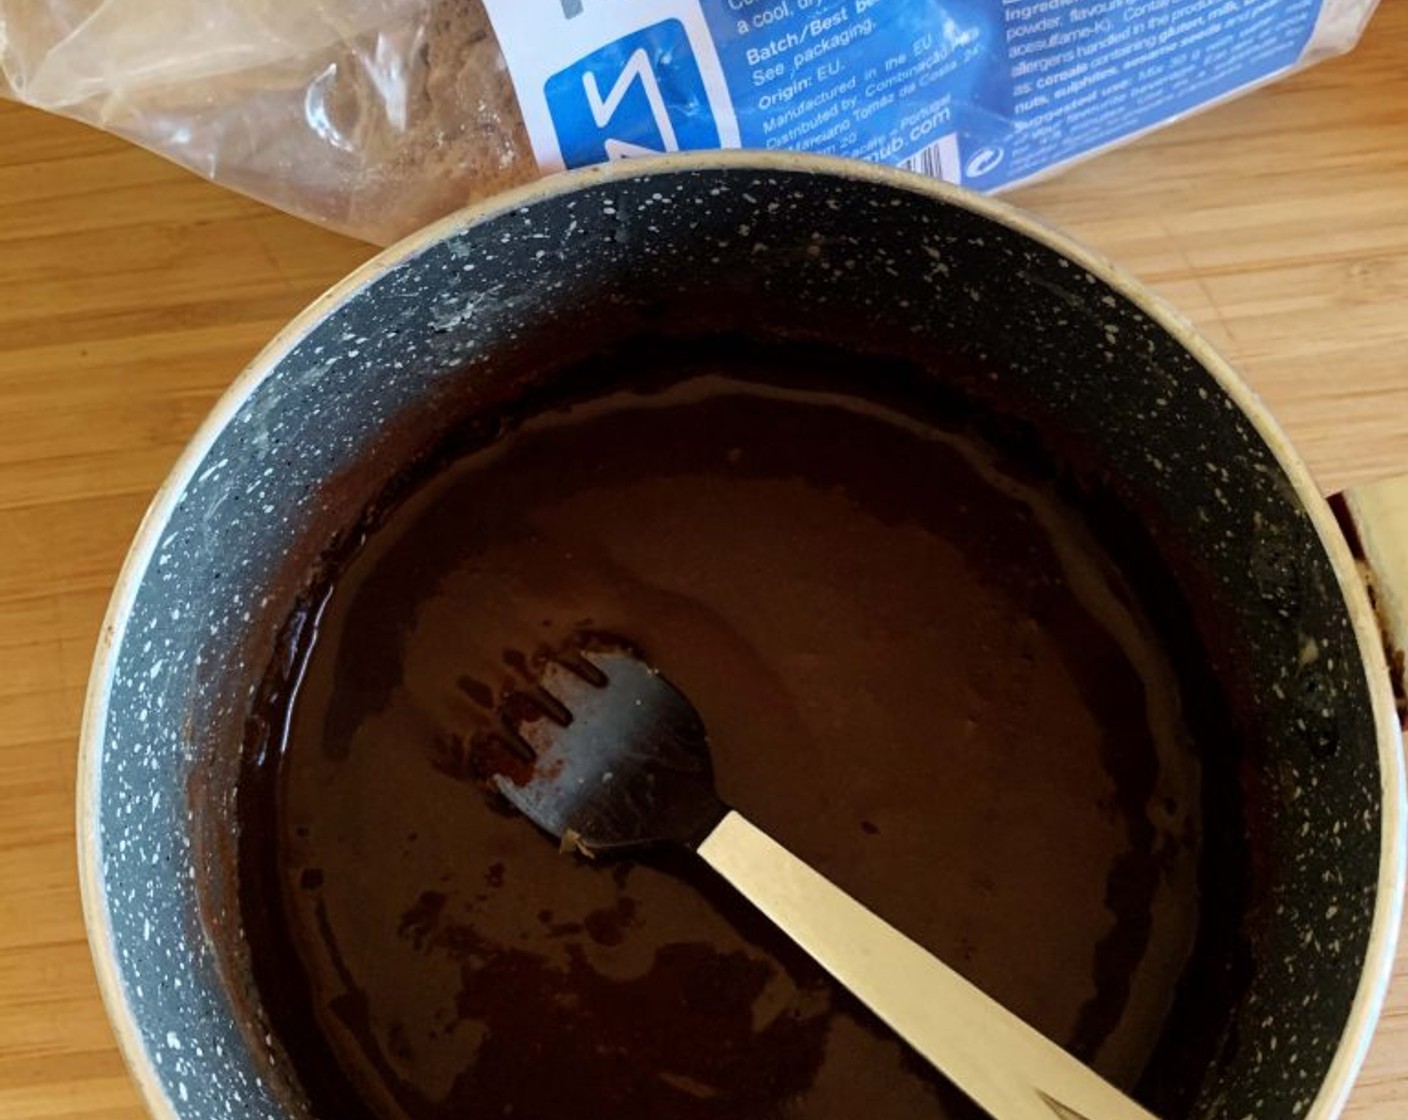 step 2 For the chocolate custard, in a saucepan place Oat Flour (1 Tbsp), Unsweetened Cocoa Powder (1 Tbsp), and Vanilla Extract (as needed). Add in the Eggs (3 Tbsp) and whisk until smooth.